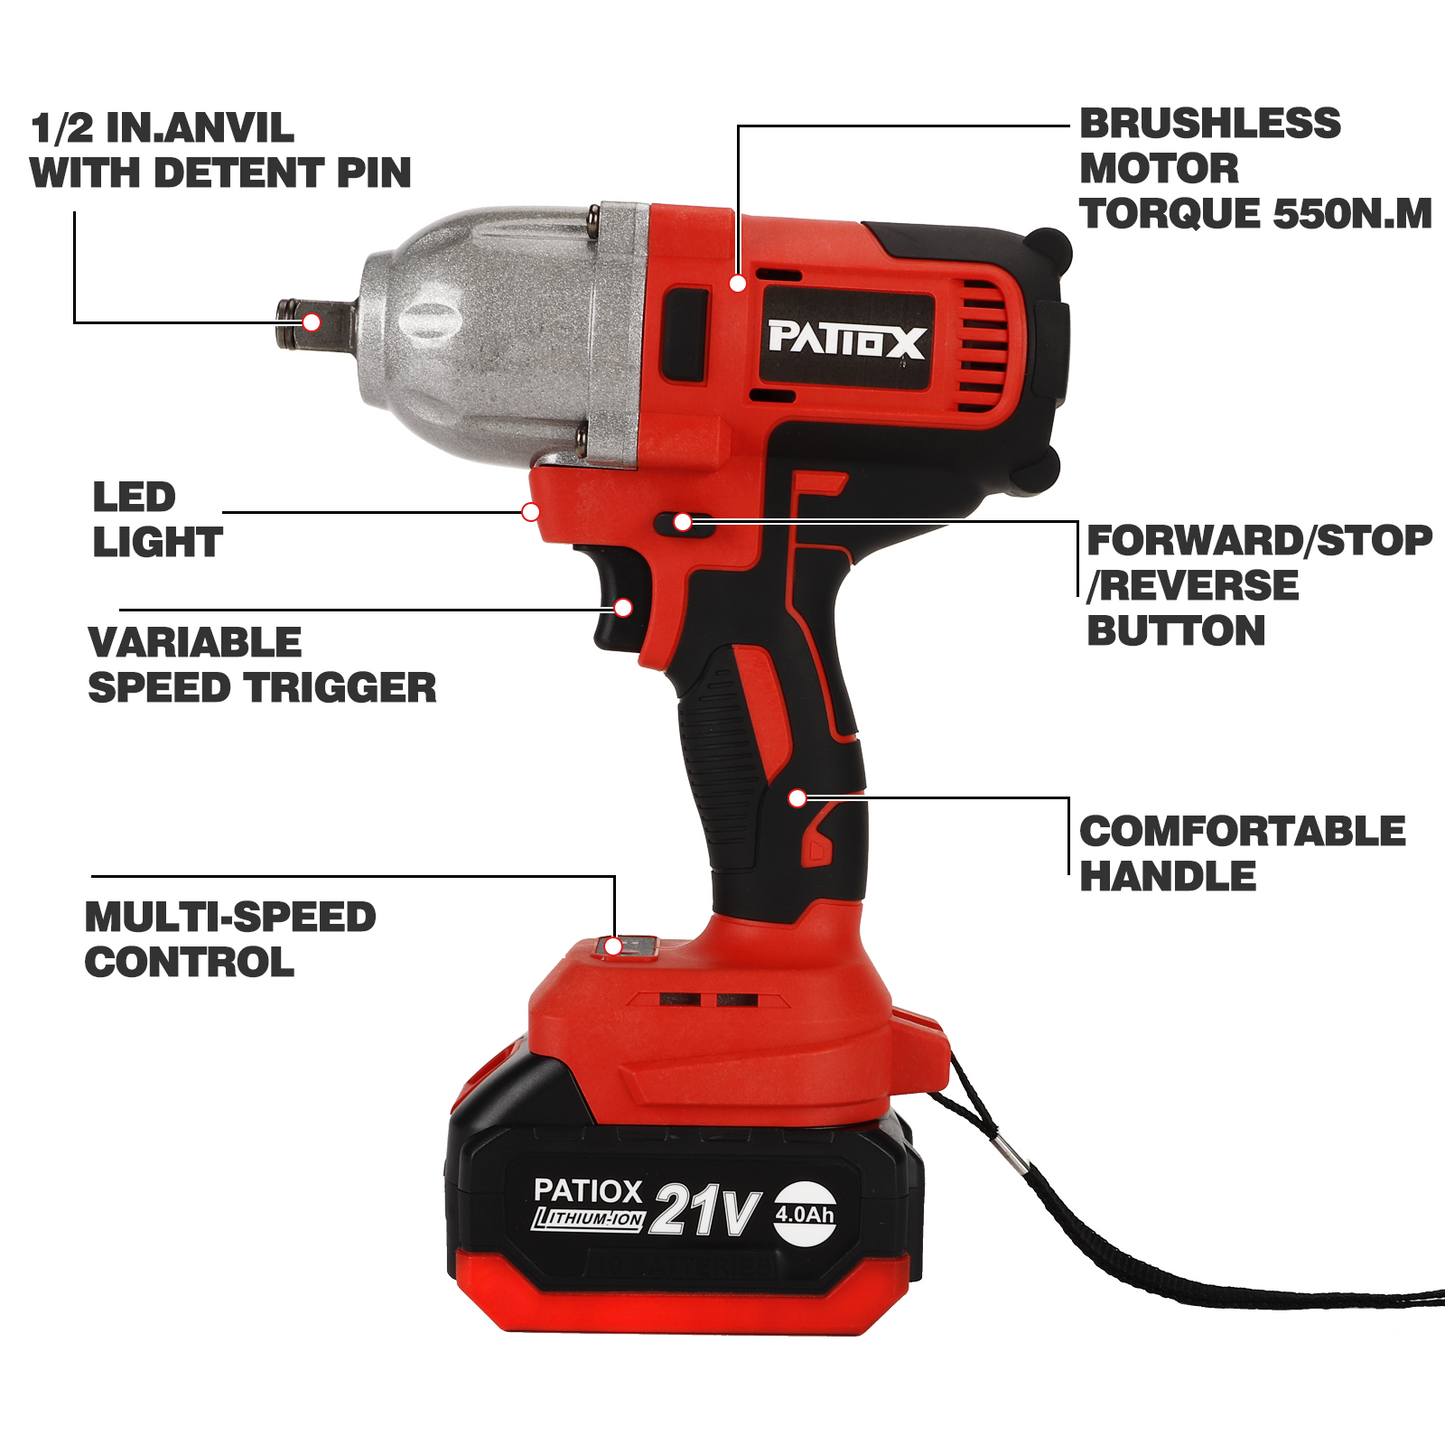 PATIOX Power Impact Wrench High Torque 1/2" Electric Impact Gun,Impact Wrench Max Torque 600 ft lbs, Cordless, Impact wrenchs Kit with 4.0A Battery,Fast Charger LED Light